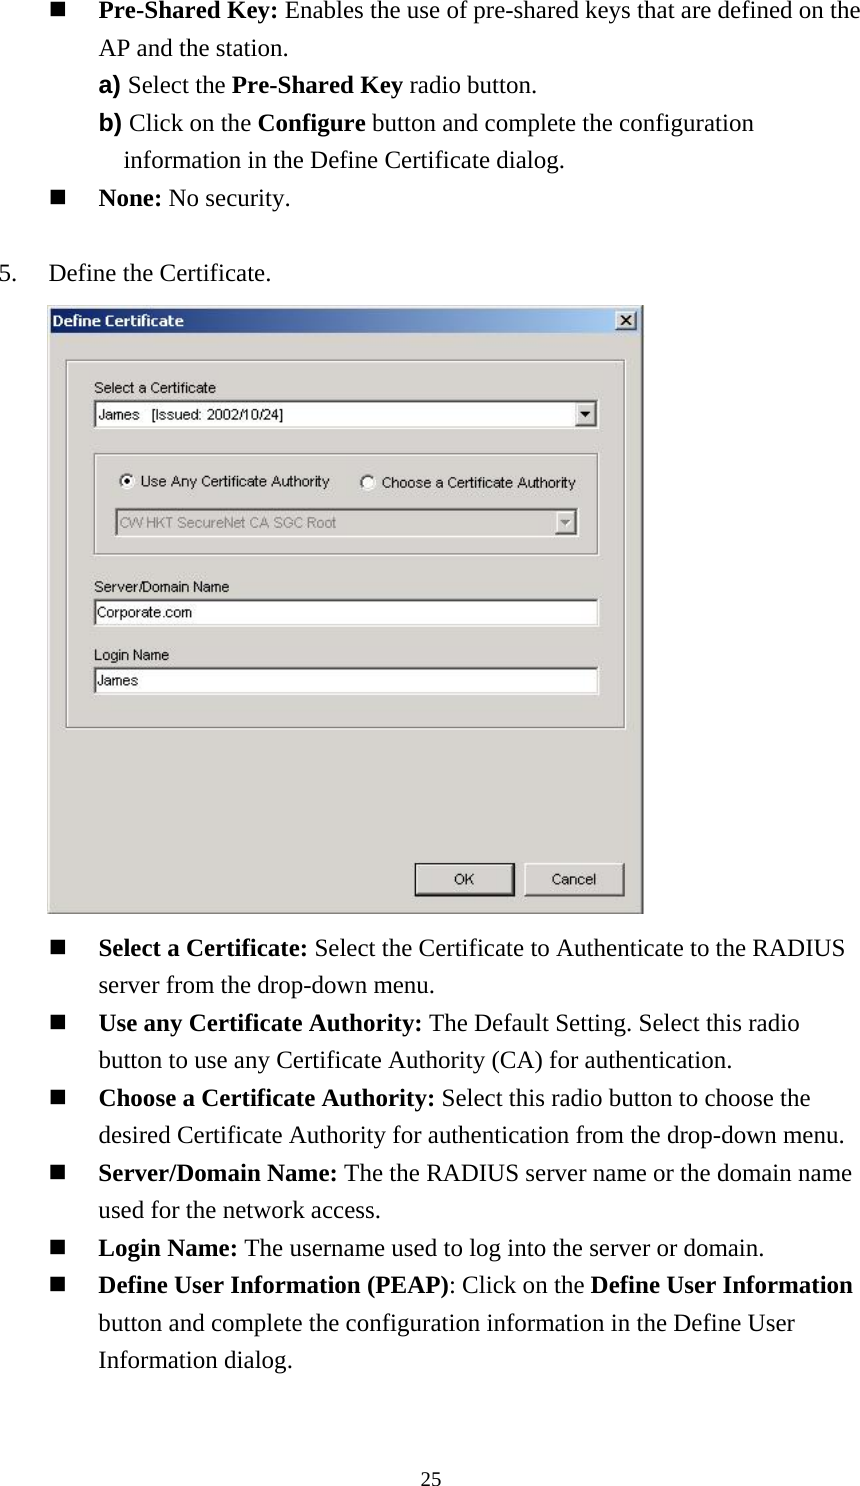  25 Pre-Shared Key: Enables the use of pre-shared keys that are defined on the AP and the station. a) Select the Pre-Shared Key radio button. b) Click on the Configure button and complete the configuration information in the Define Certificate dialog.  None: No security.  5.    Define the Certificate.        Select a Certificate: Select the Certificate to Authenticate to the RADIUS server from the drop-down menu.  Use any Certificate Authority: The Default Setting. Select this radio button to use any Certificate Authority (CA) for authentication.  Choose a Certificate Authority: Select this radio button to choose the desired Certificate Authority for authentication from the drop-down menu.  Server/Domain Name: The the RADIUS server name or the domain name used for the network access.  Login Name: The username used to log into the server or domain.  Define User Information (PEAP): Click on the Define User Information button and complete the configuration information in the Define User Information dialog.  